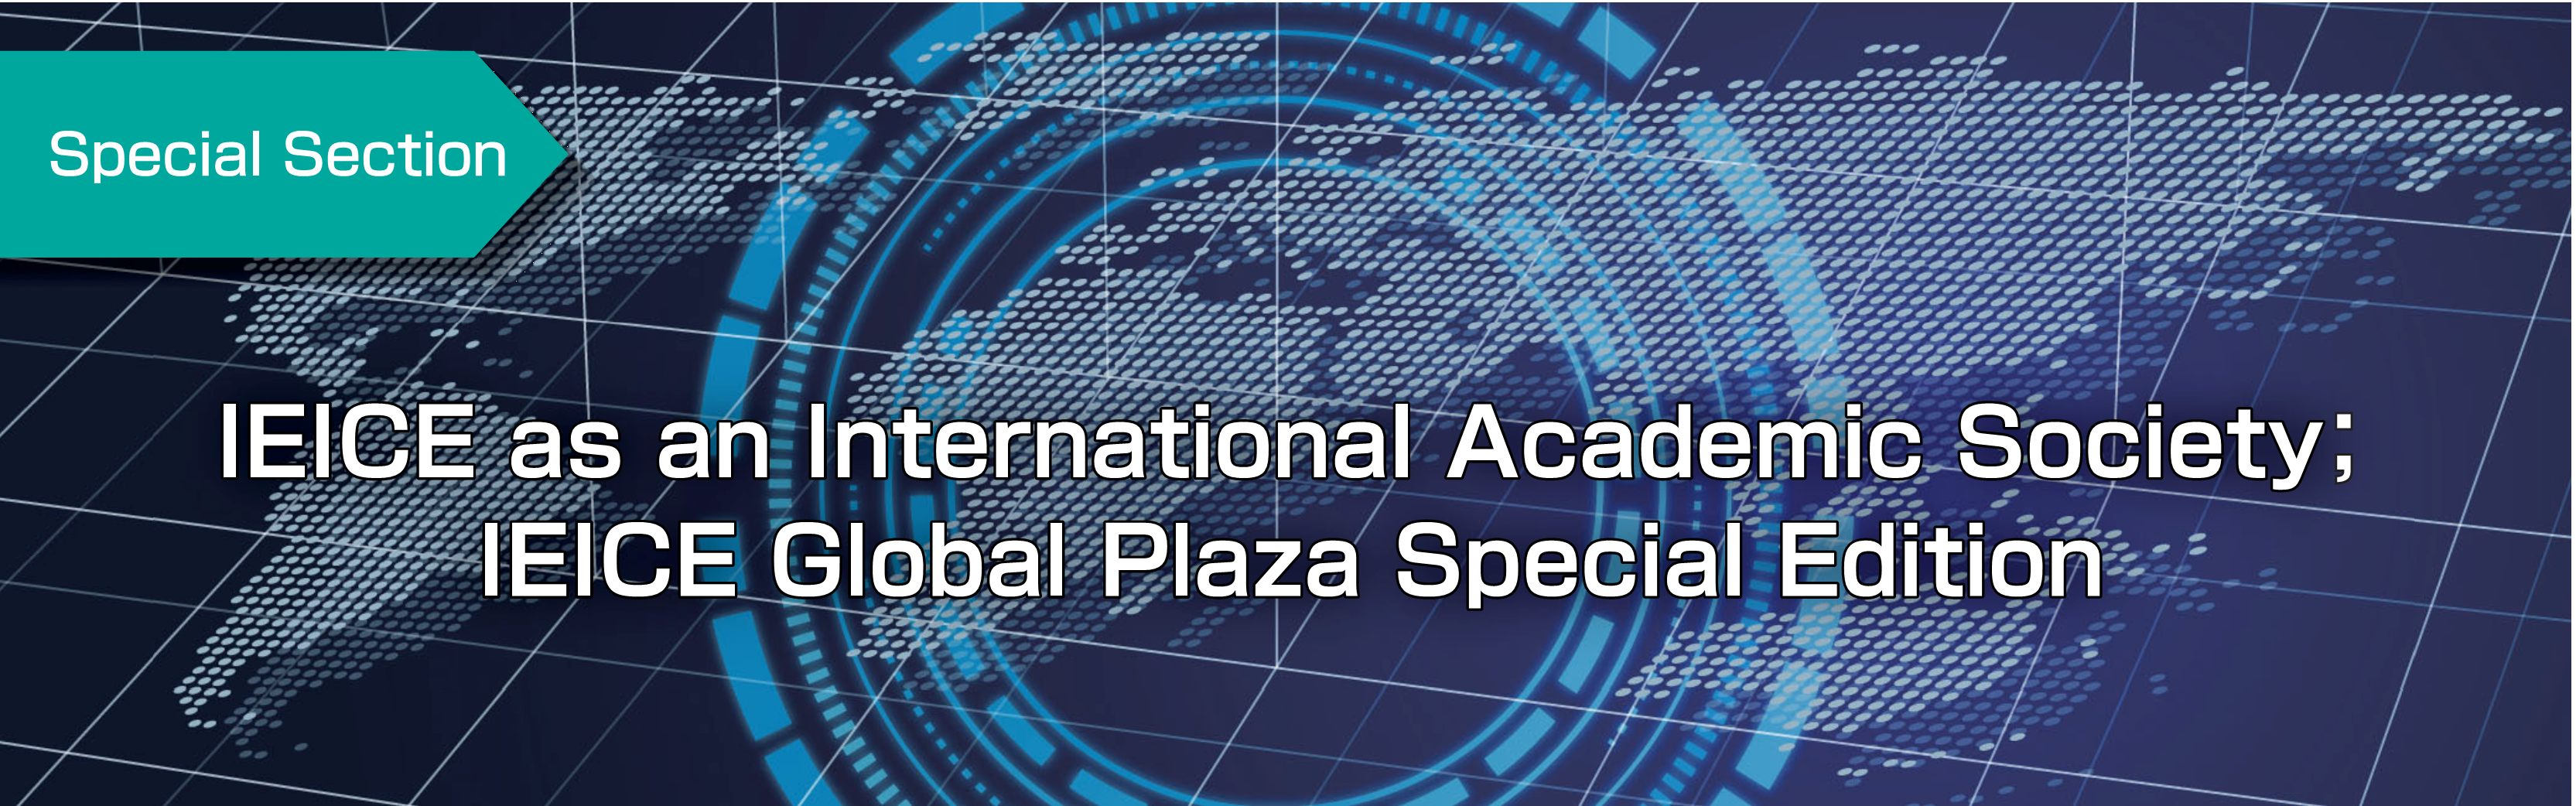 Special Section IEICE as an International Academic Society; IEICE